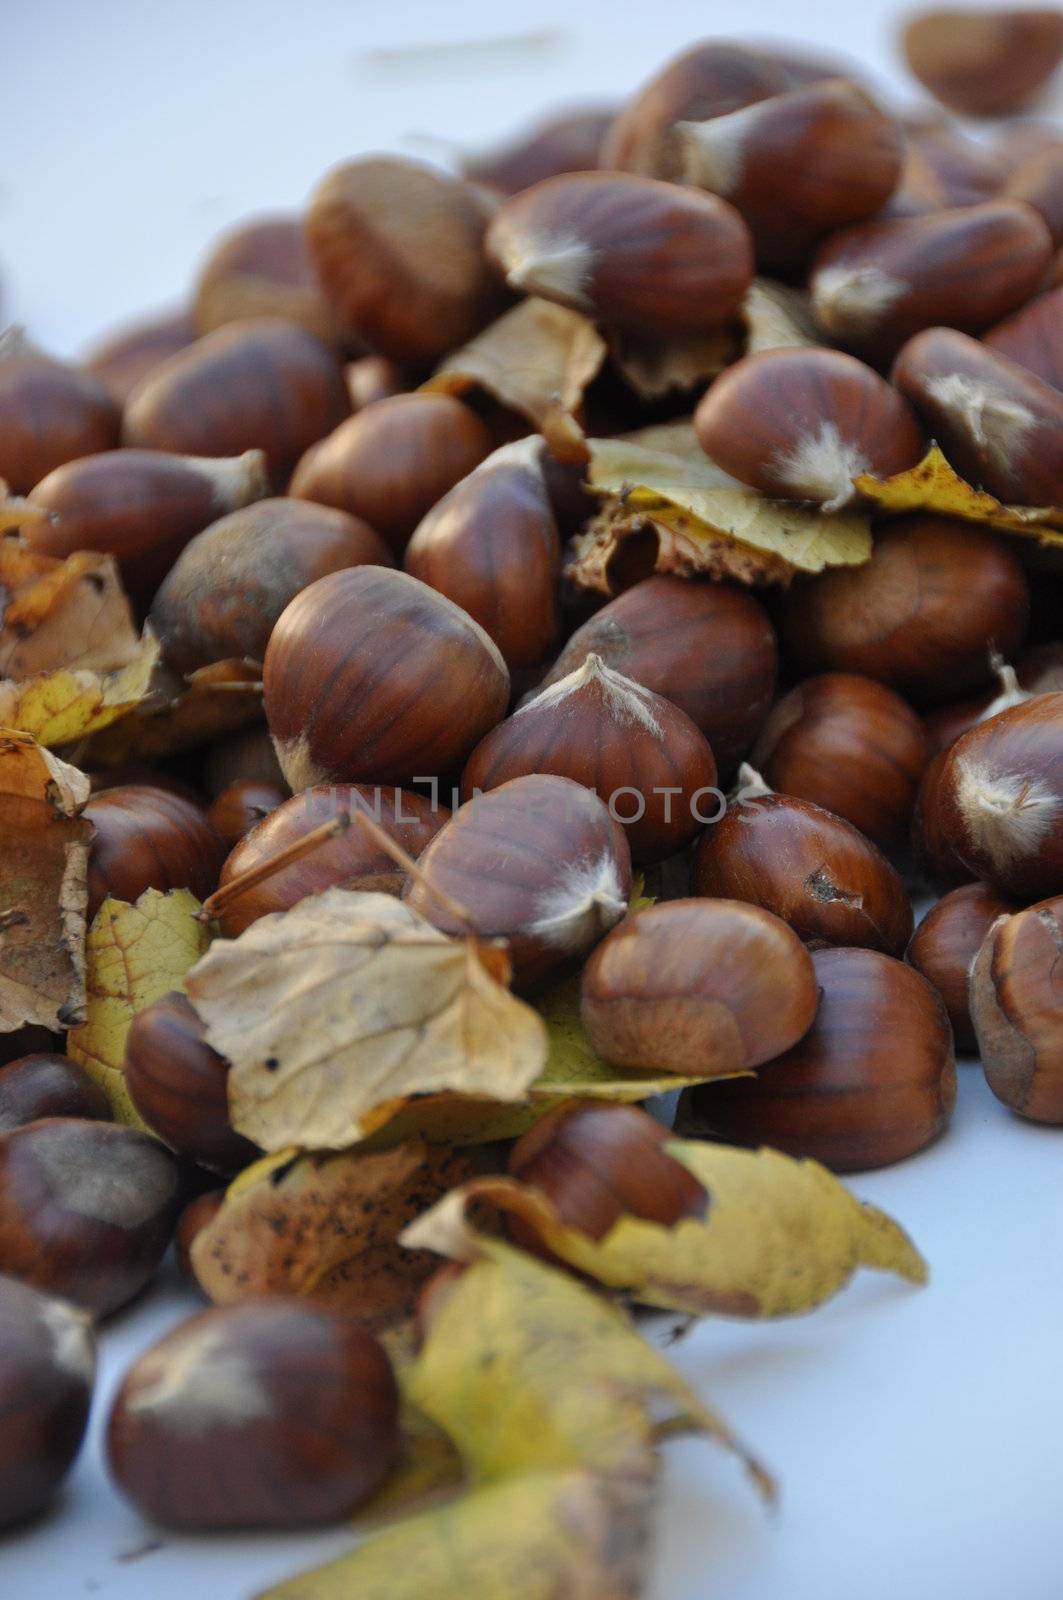 Chestnut (Castanea) and the edible nuts they produce